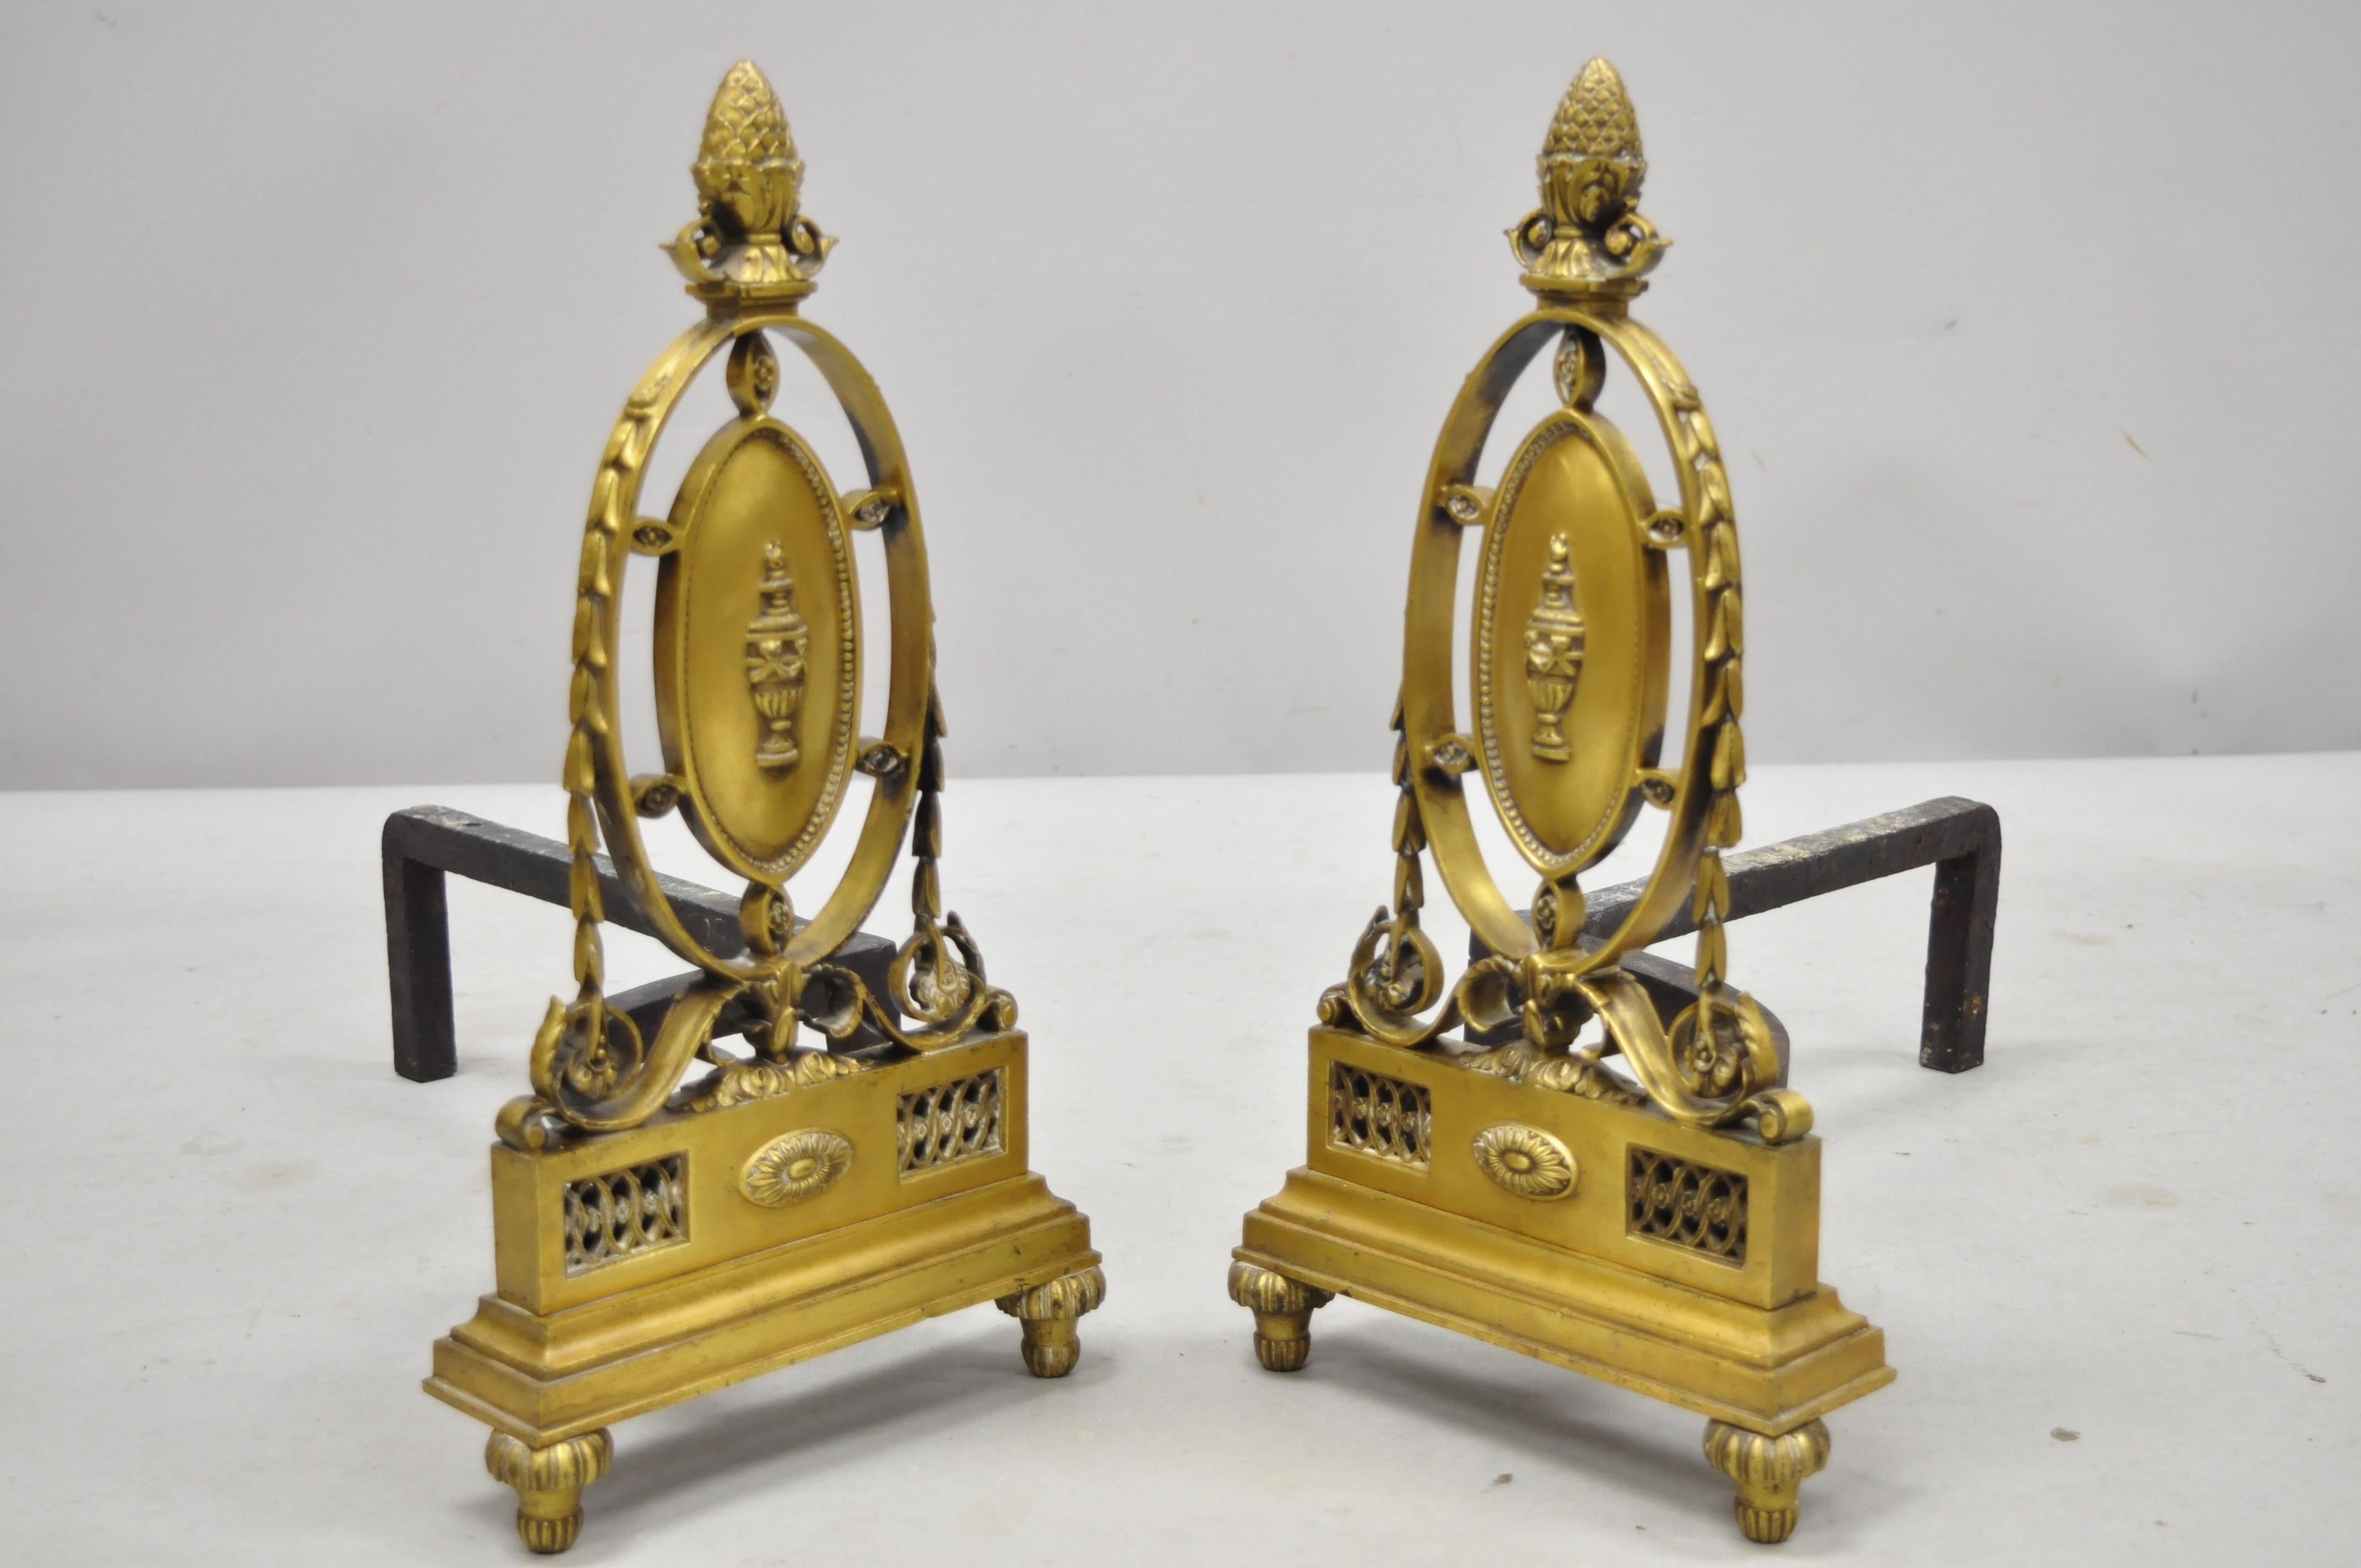 Pair of antique French Empire Sheraton style brass bronze urn acorn fireplace andirons, circa late 19th century. Measurements: 16.5